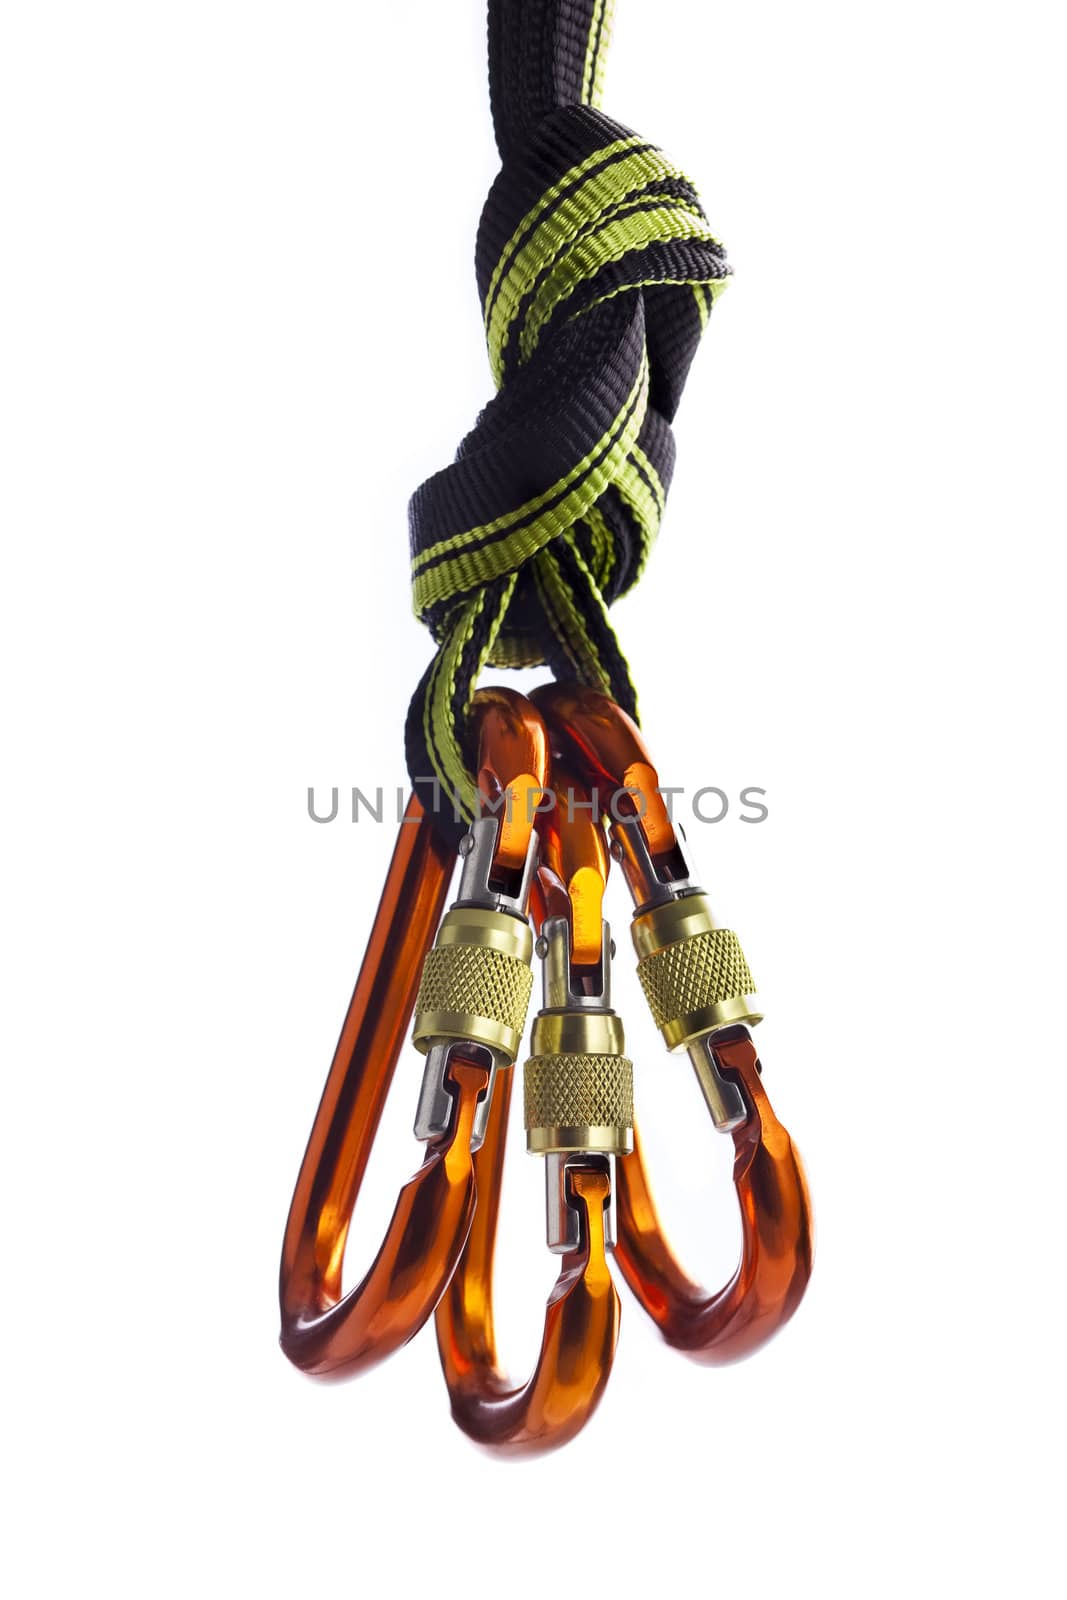 Carabiners on the rope by mjp